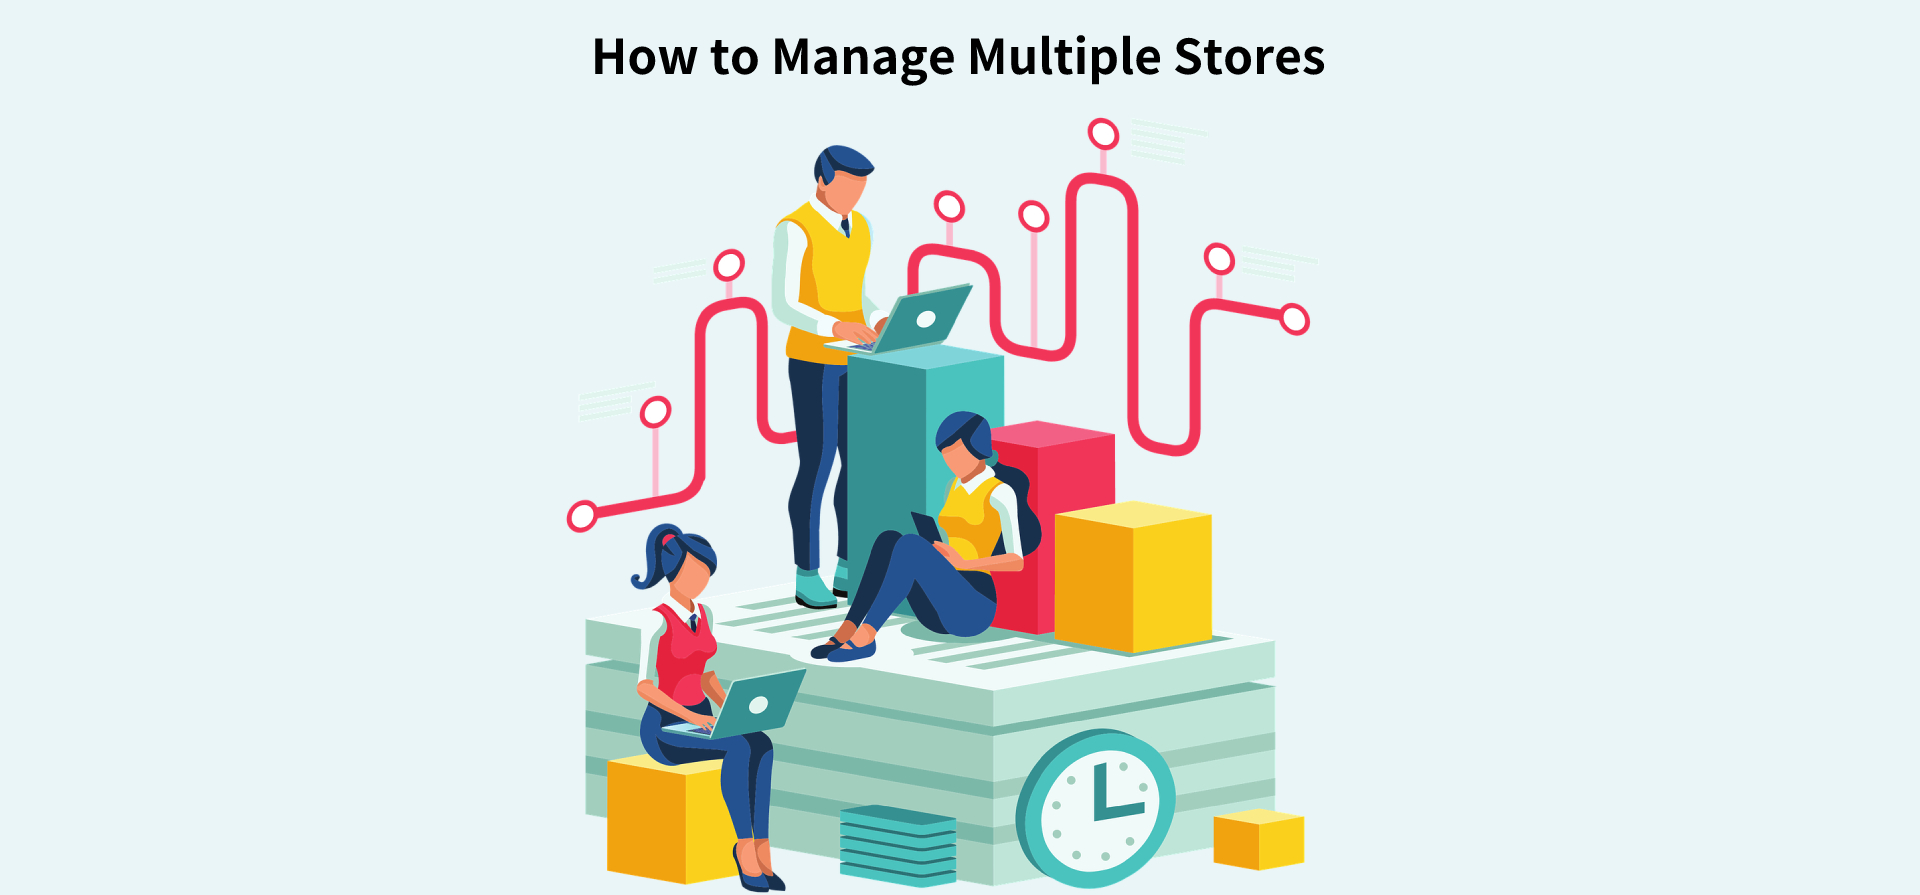 How to Manage Multiple Stores?